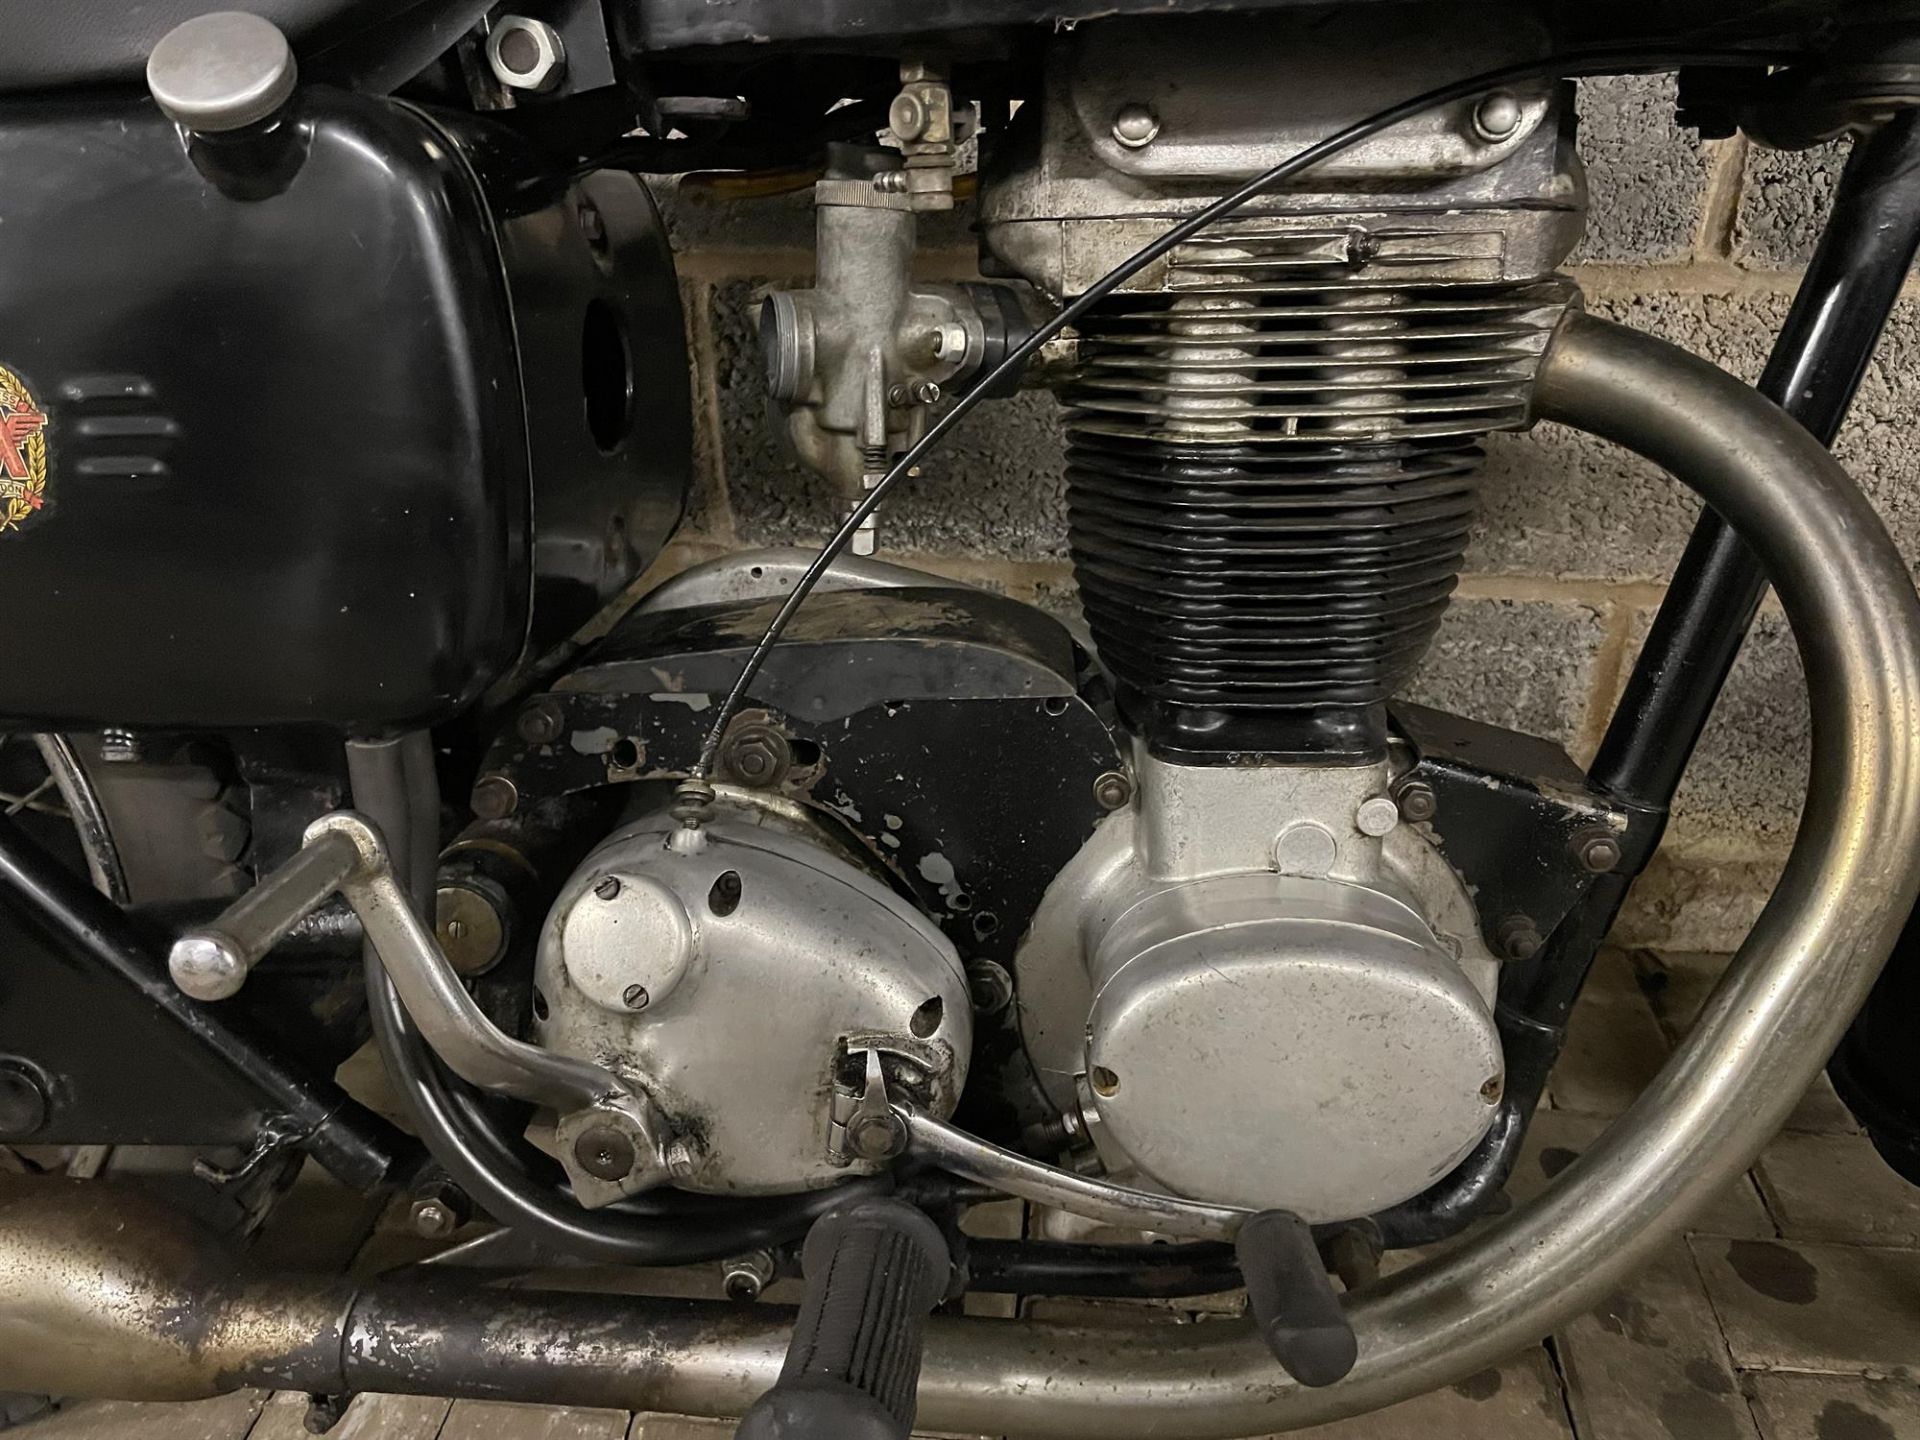 1958 Matchless G3 350cc - Image 3 of 10